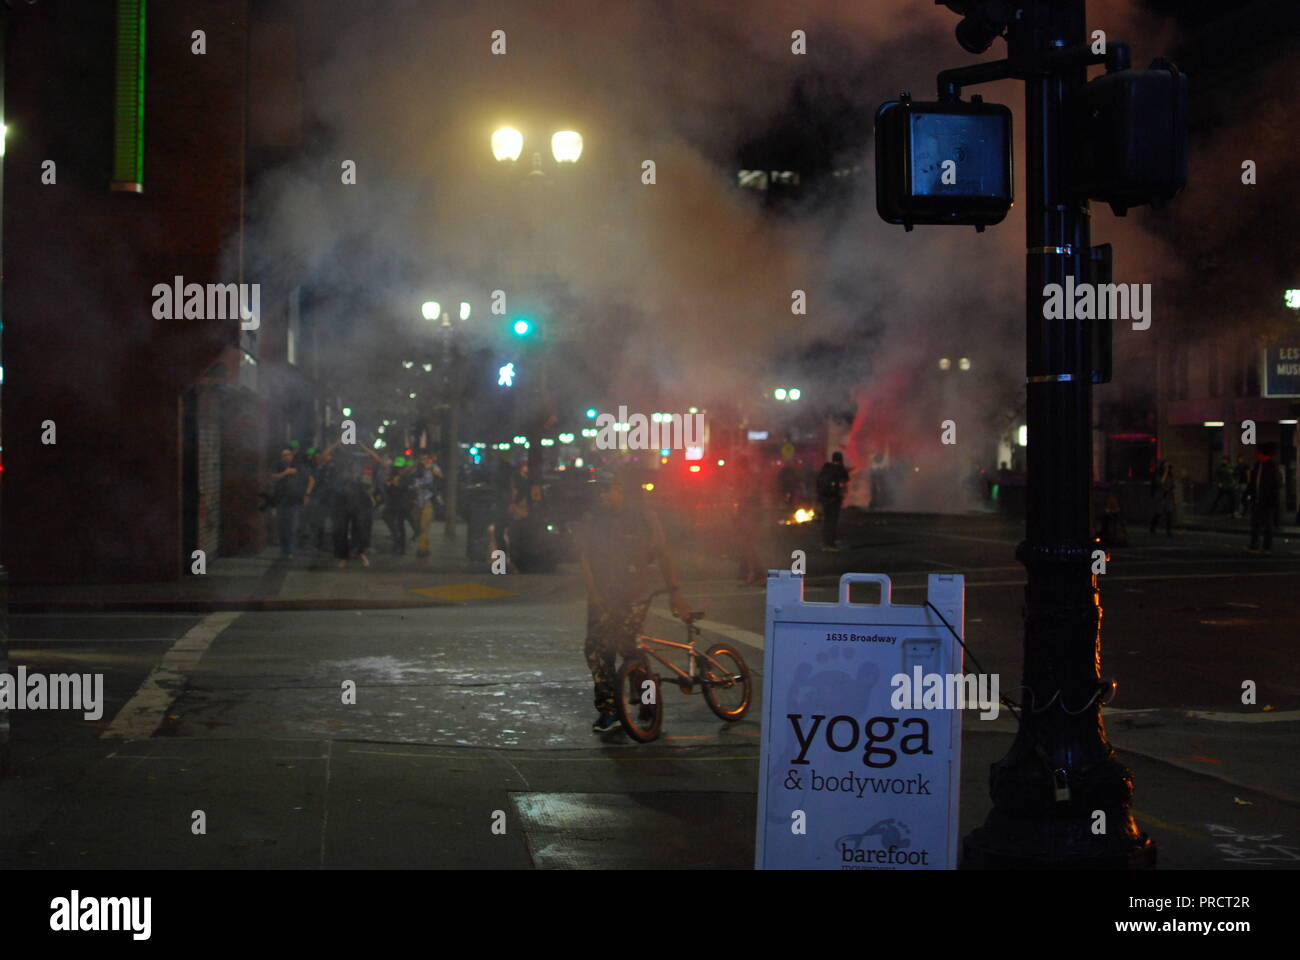 A cloud after a smoke grenade deployment by police on Broadway in Oakland during protests over the election of President Donald Trump on Nov. 9, 2016. Stock Photo